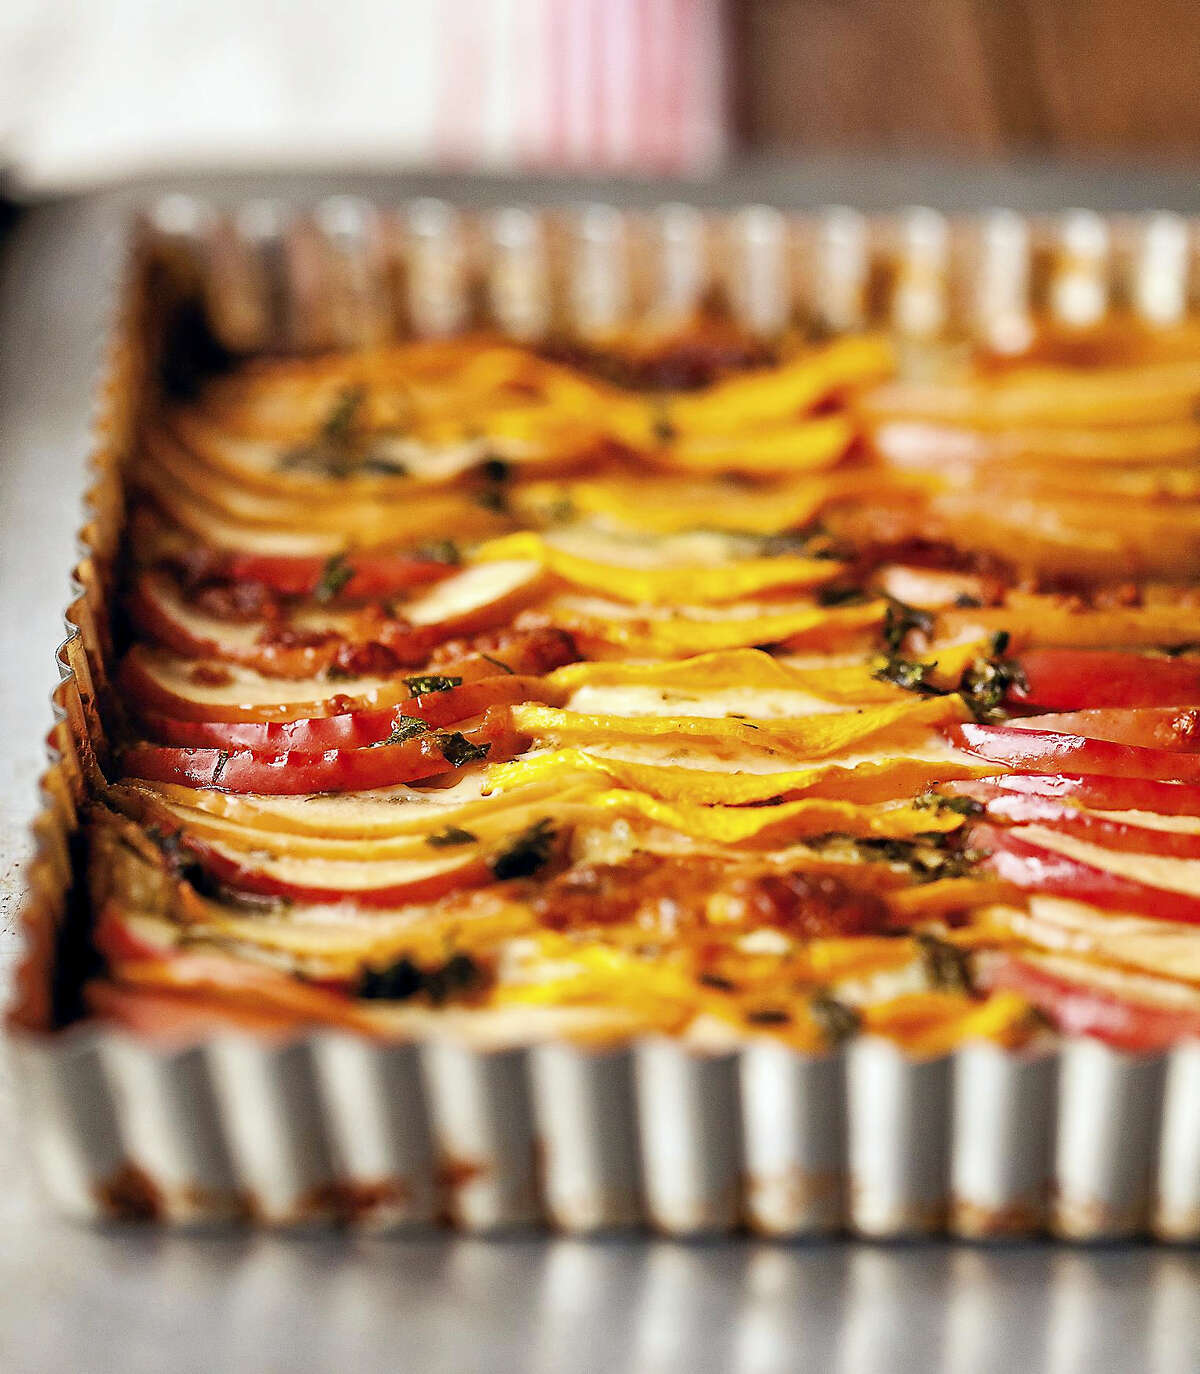 The beauty of apple & winter squash tian is in the presentation.